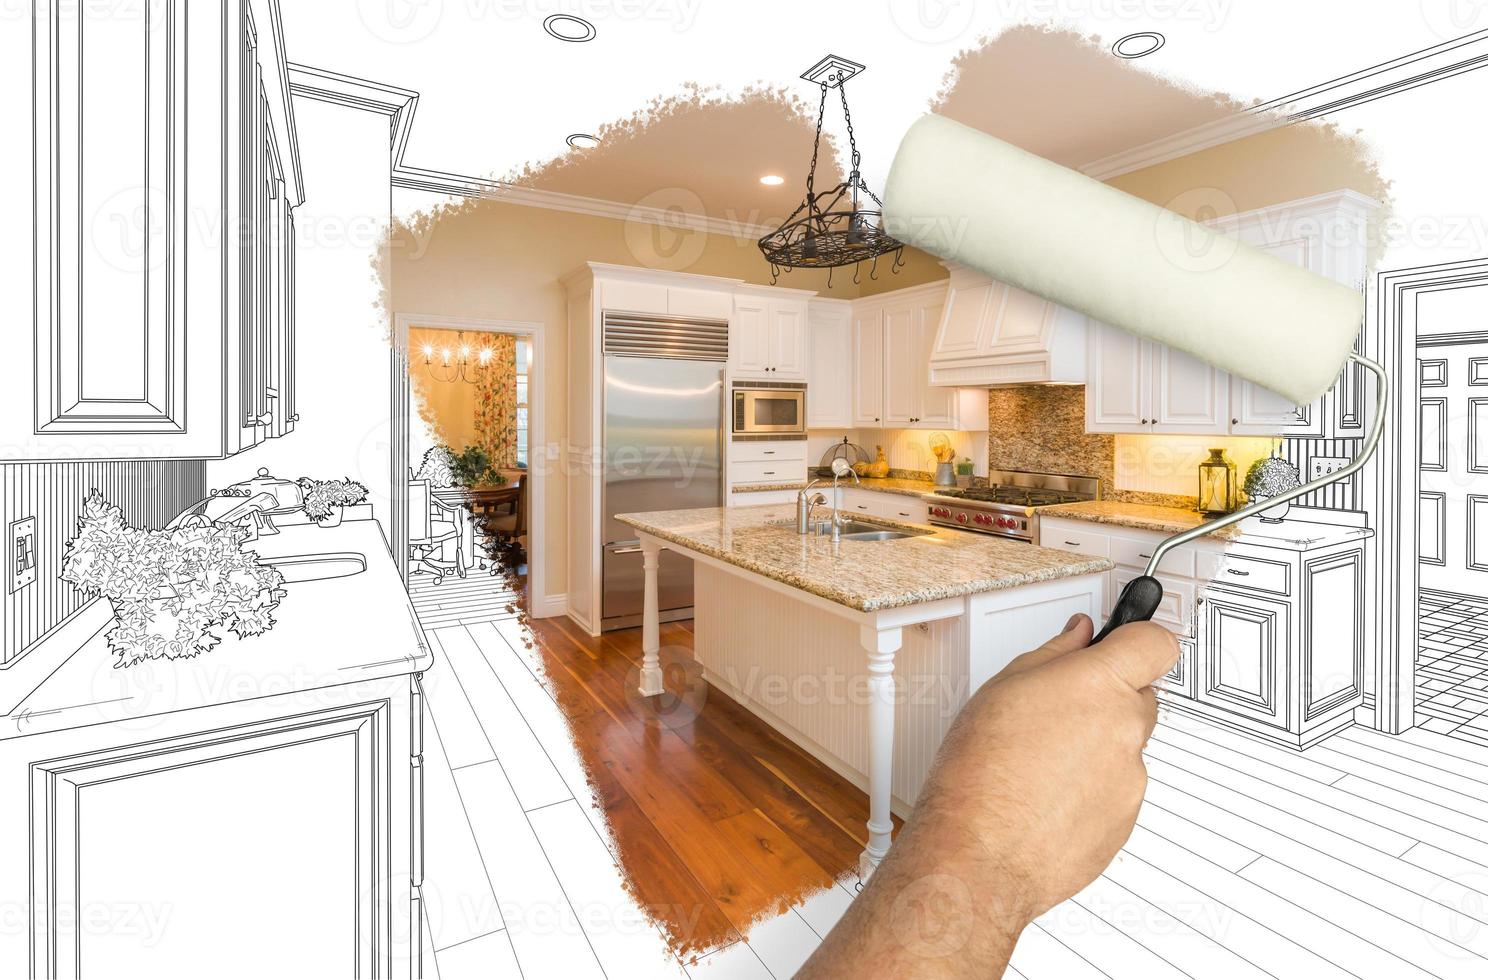 Before and After of Man Painting Roller to Reveal Newly Remodeled Kitchen Under Pencil Drawing Plans. photo